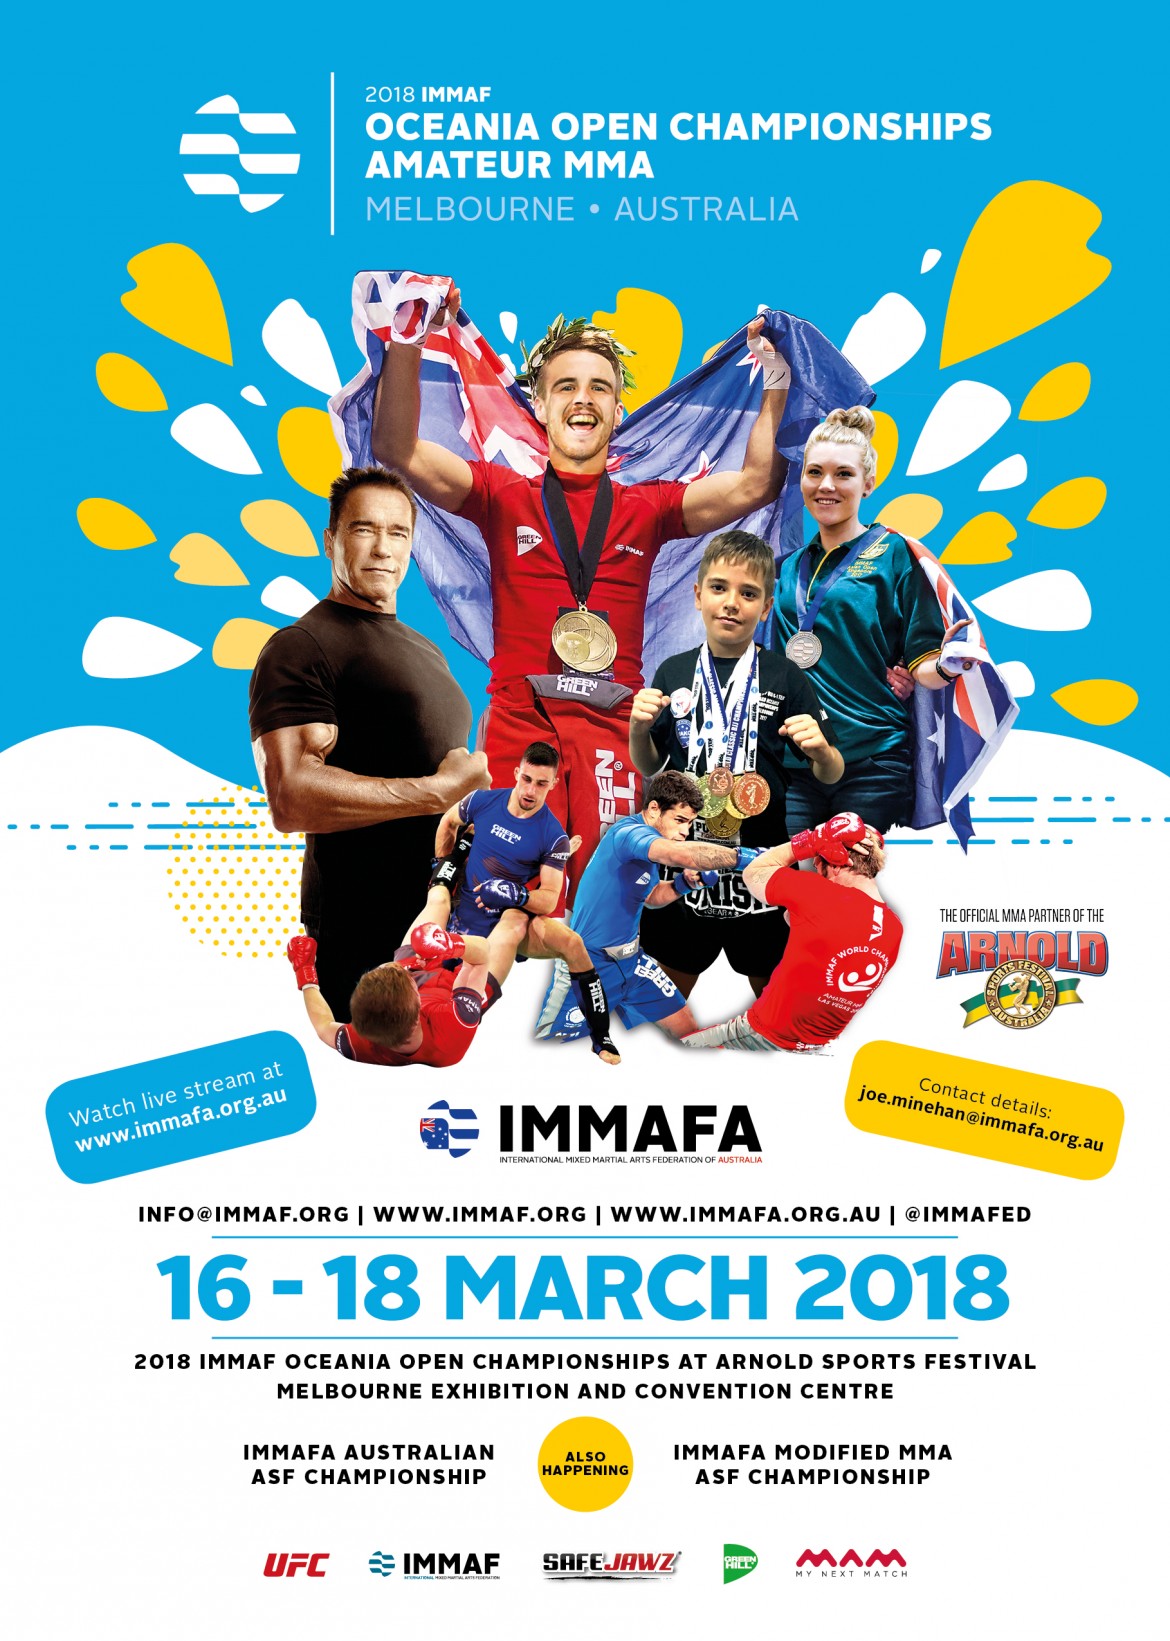 2018 IMMAF OCEANIA OPEN CHAMPIONSHIPS INTRODUCES NEW DIVISIONS